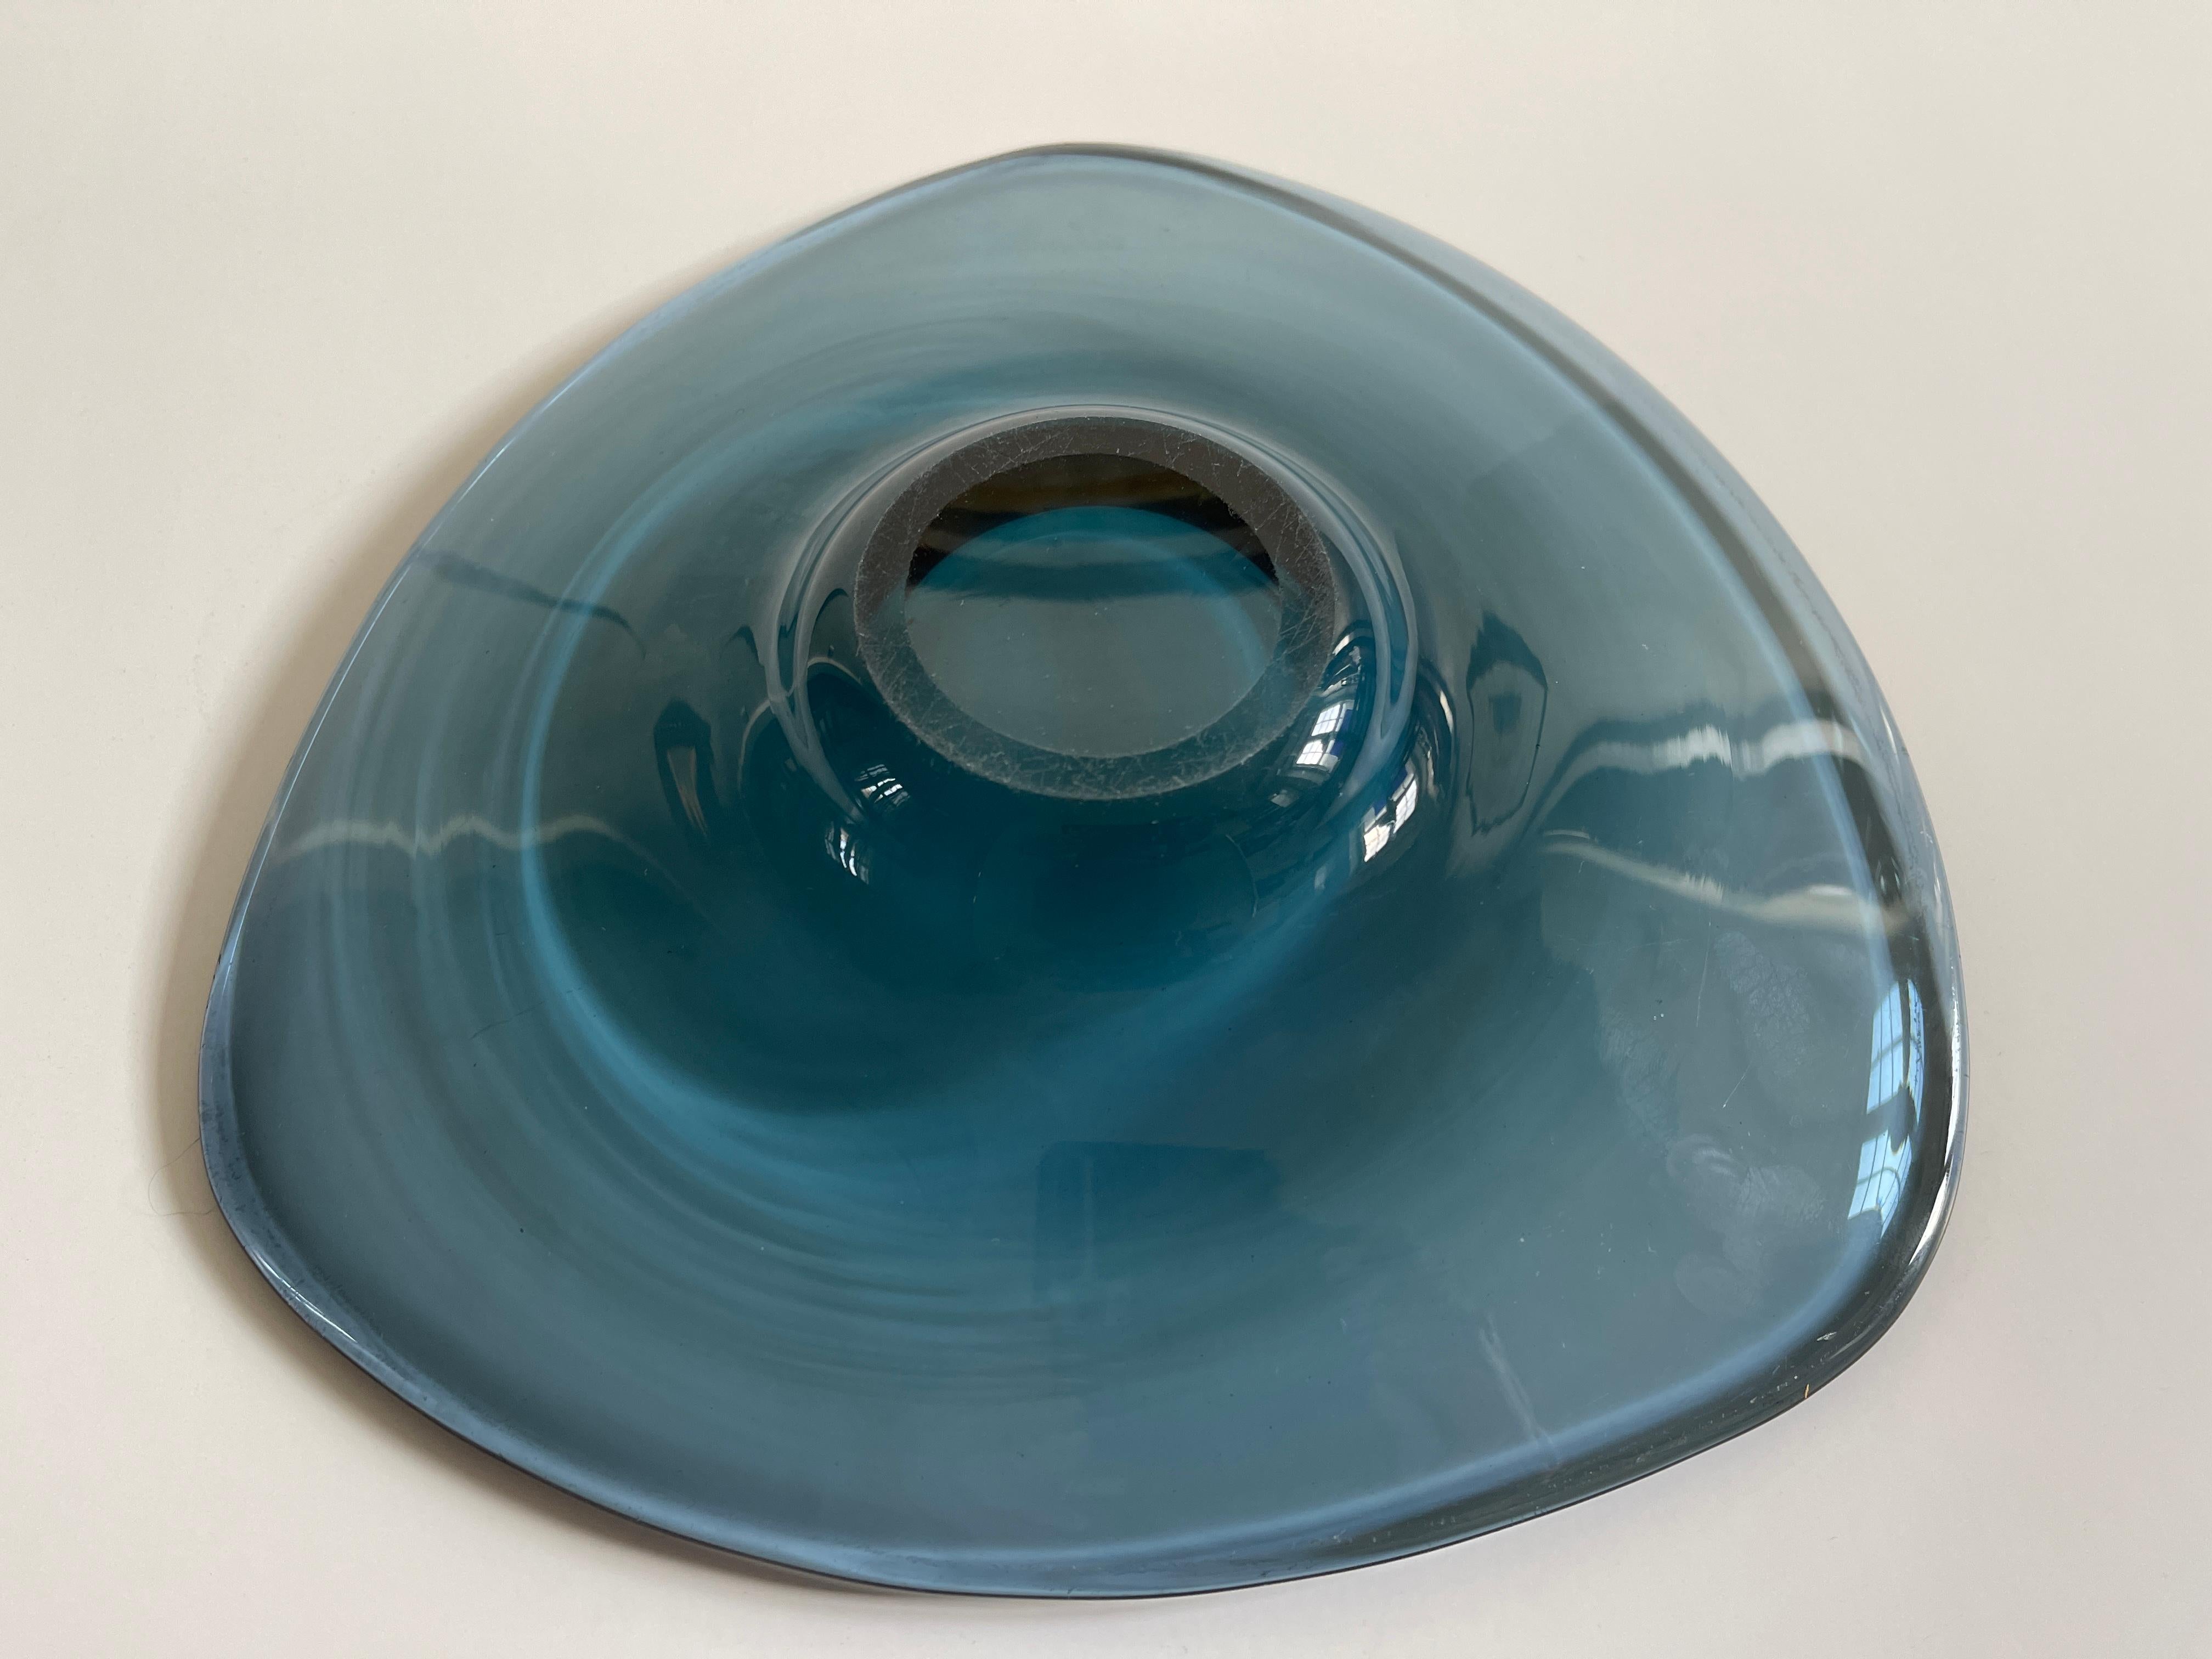 1960s Danish Modern Rouleaux Curved Triangle Blue Smoke Glass Tray For Sale 1